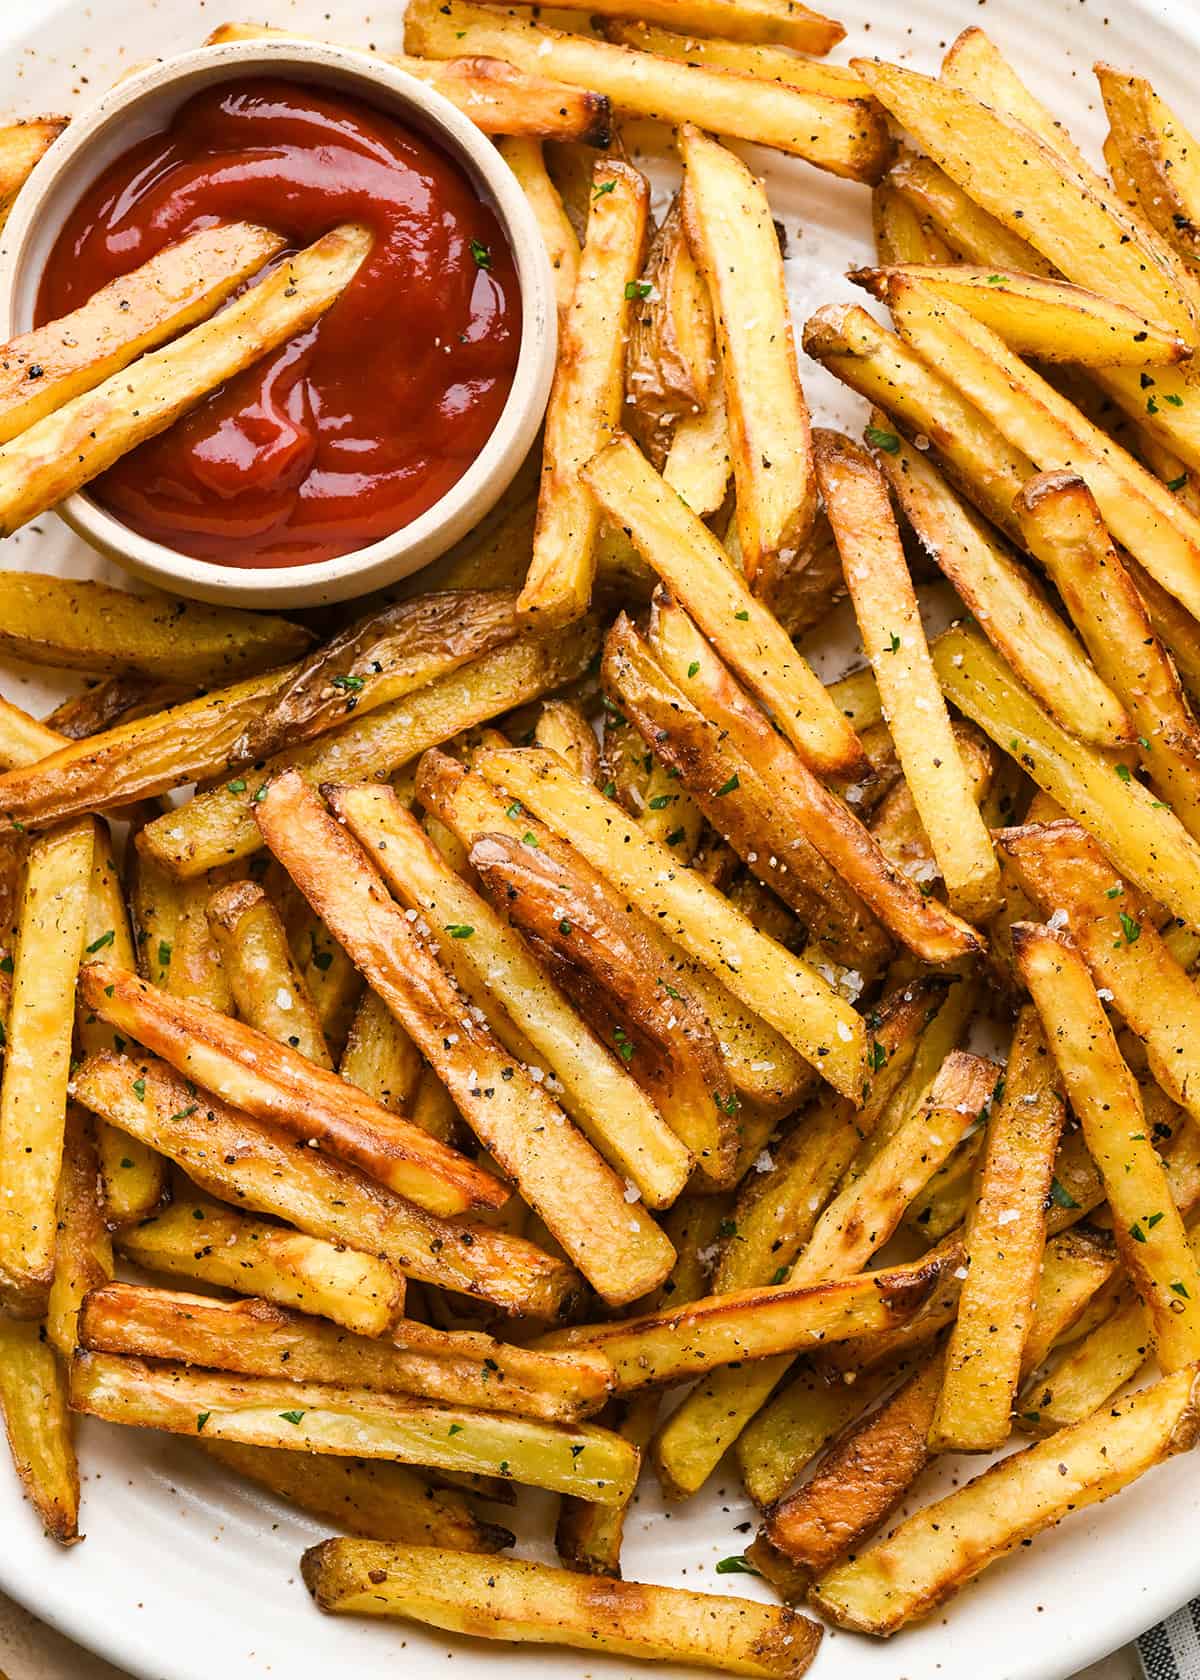 Homemade French Fries on a serving plate with a bowl of ketchup